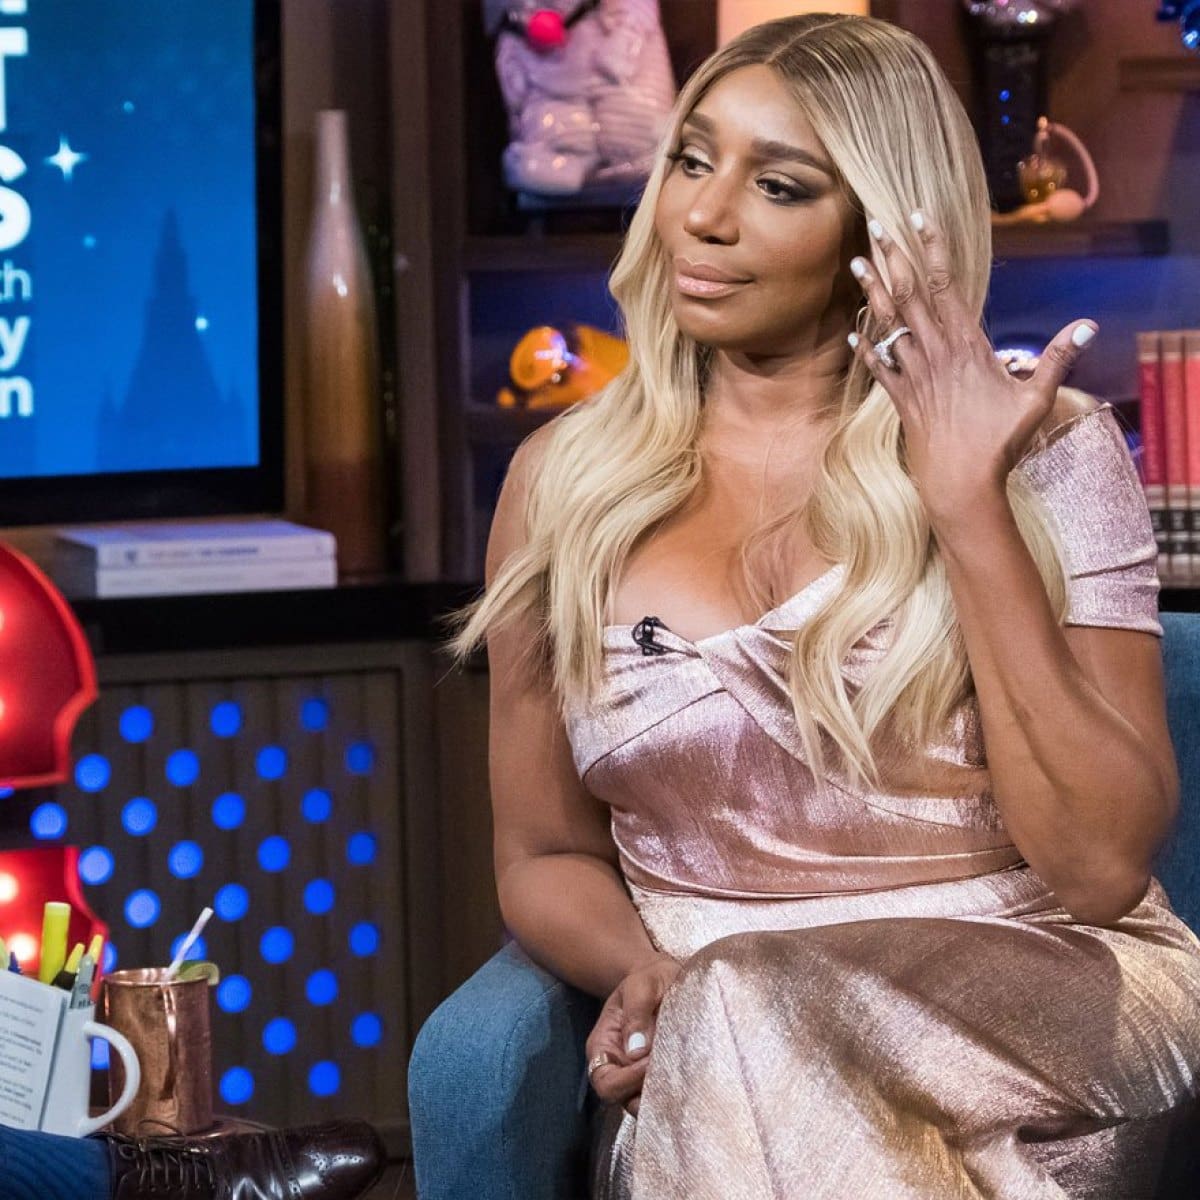 NeNe Leakes Tells Fans That Learning How To Be Fake Is A Necessary Skill These Days